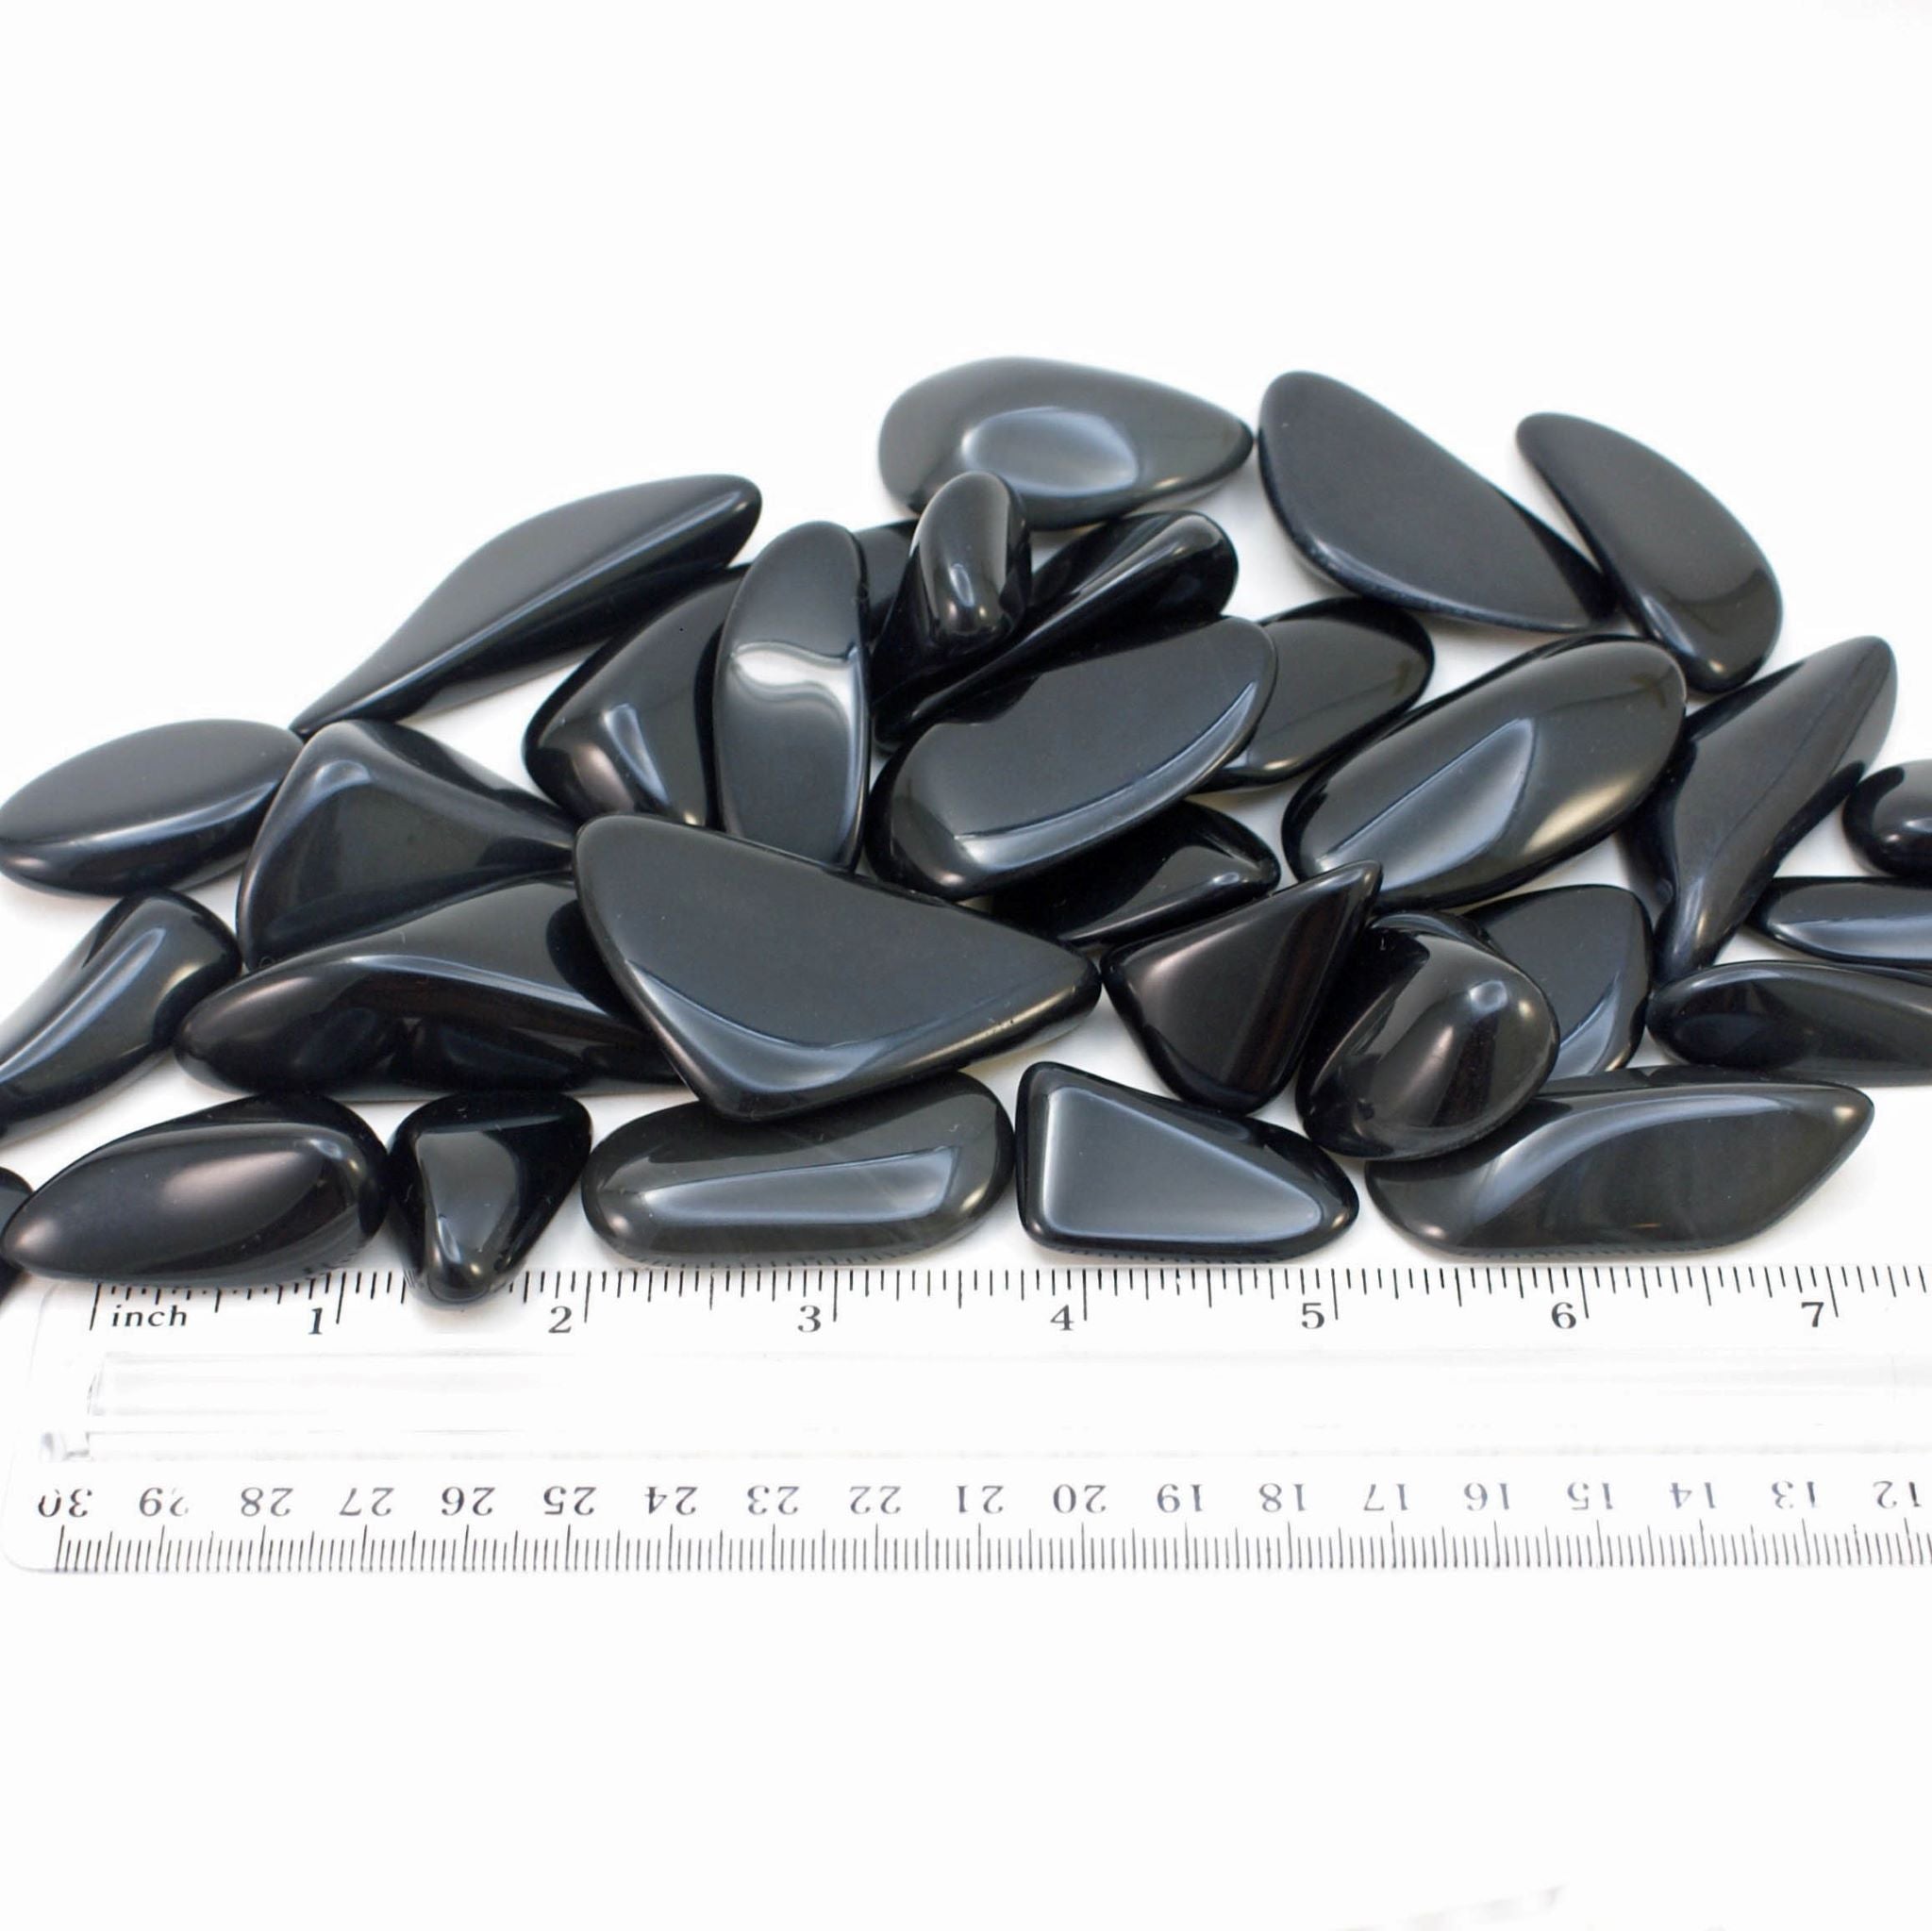 close-up of black obsidian tumbled stones with ruler